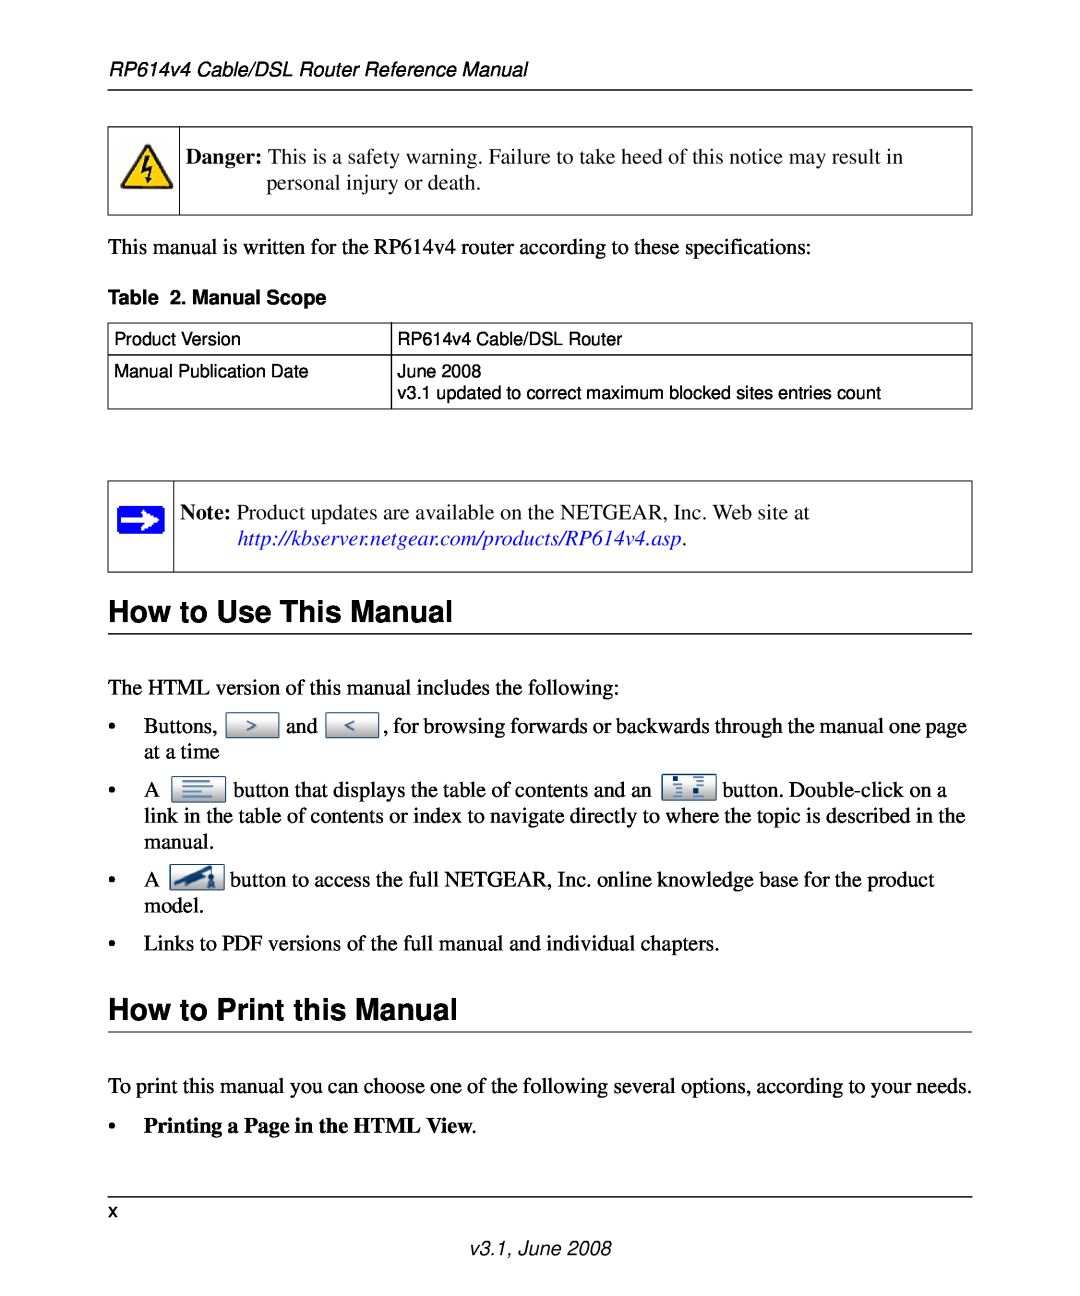 NETGEAR RP614 v4 manual How to Use This Manual, How to Print this Manual, Printing a Page in the HTML View 